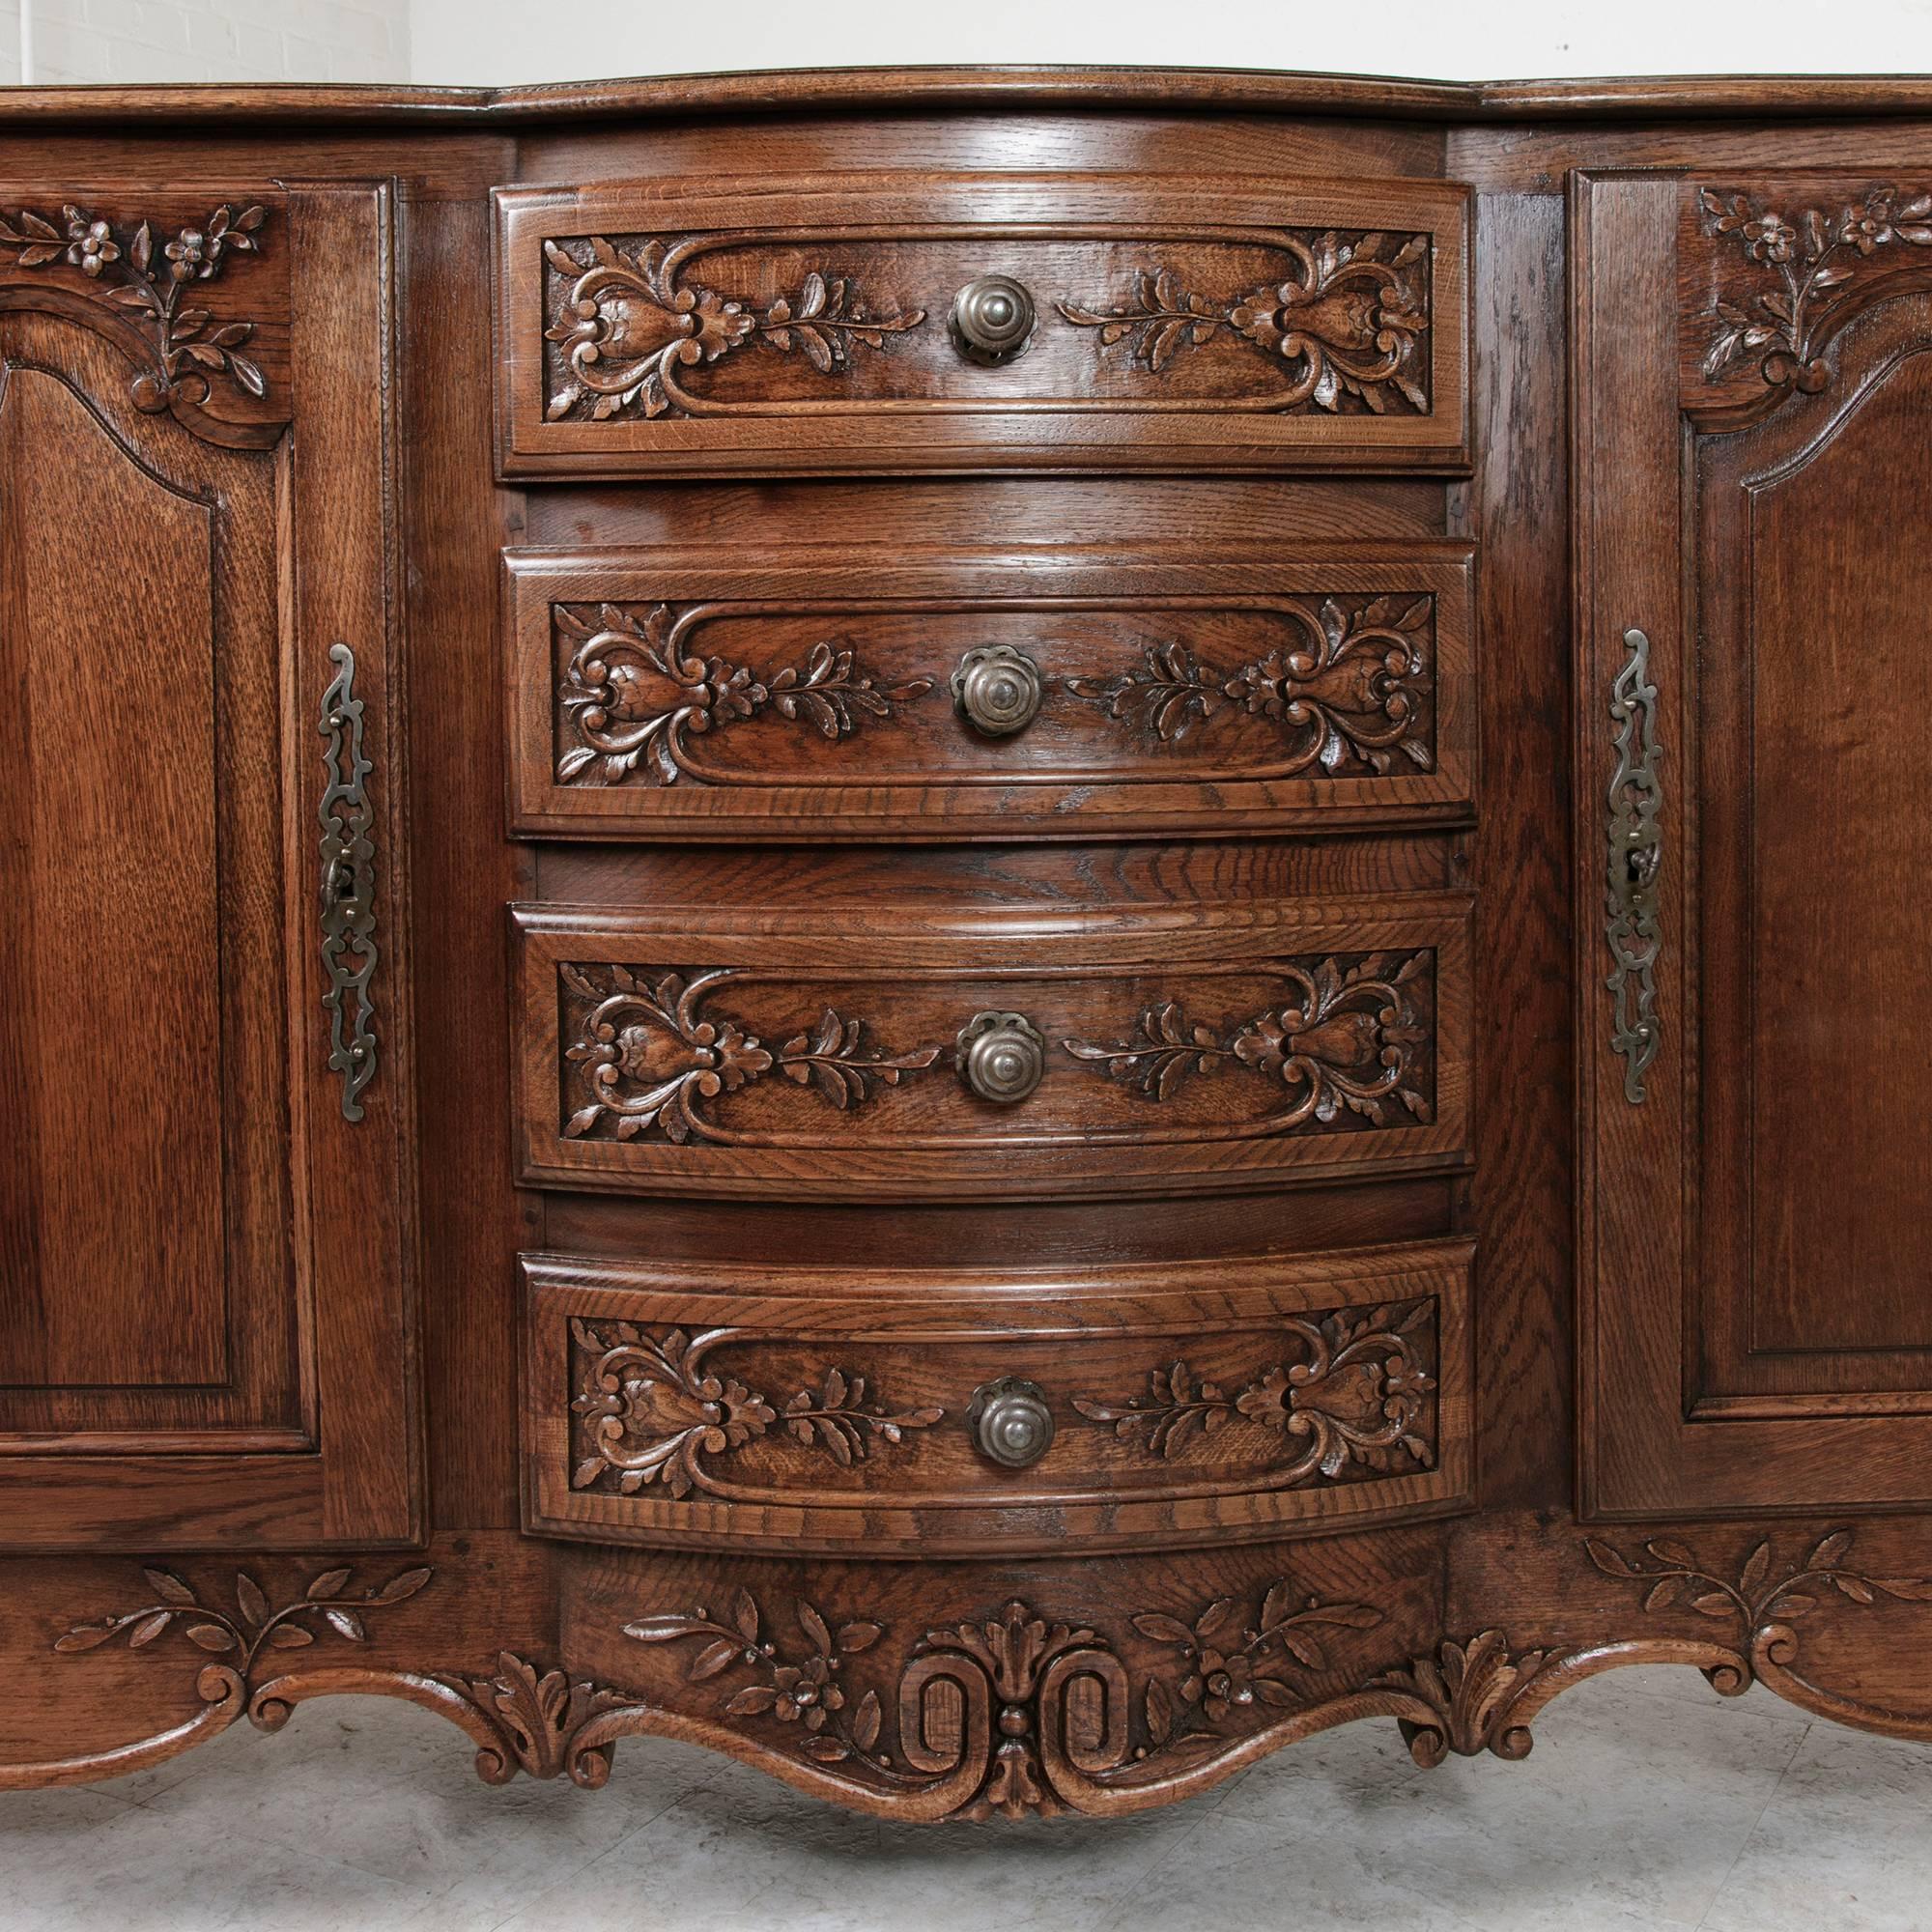 This hand-carved oak Louis XV style enfilade with bombe front boasts four center drawers, creating ample storage for your dining space. The side doors feature symmetrical acanthus leaf carvings and conceal two single interior shelves. A curved top